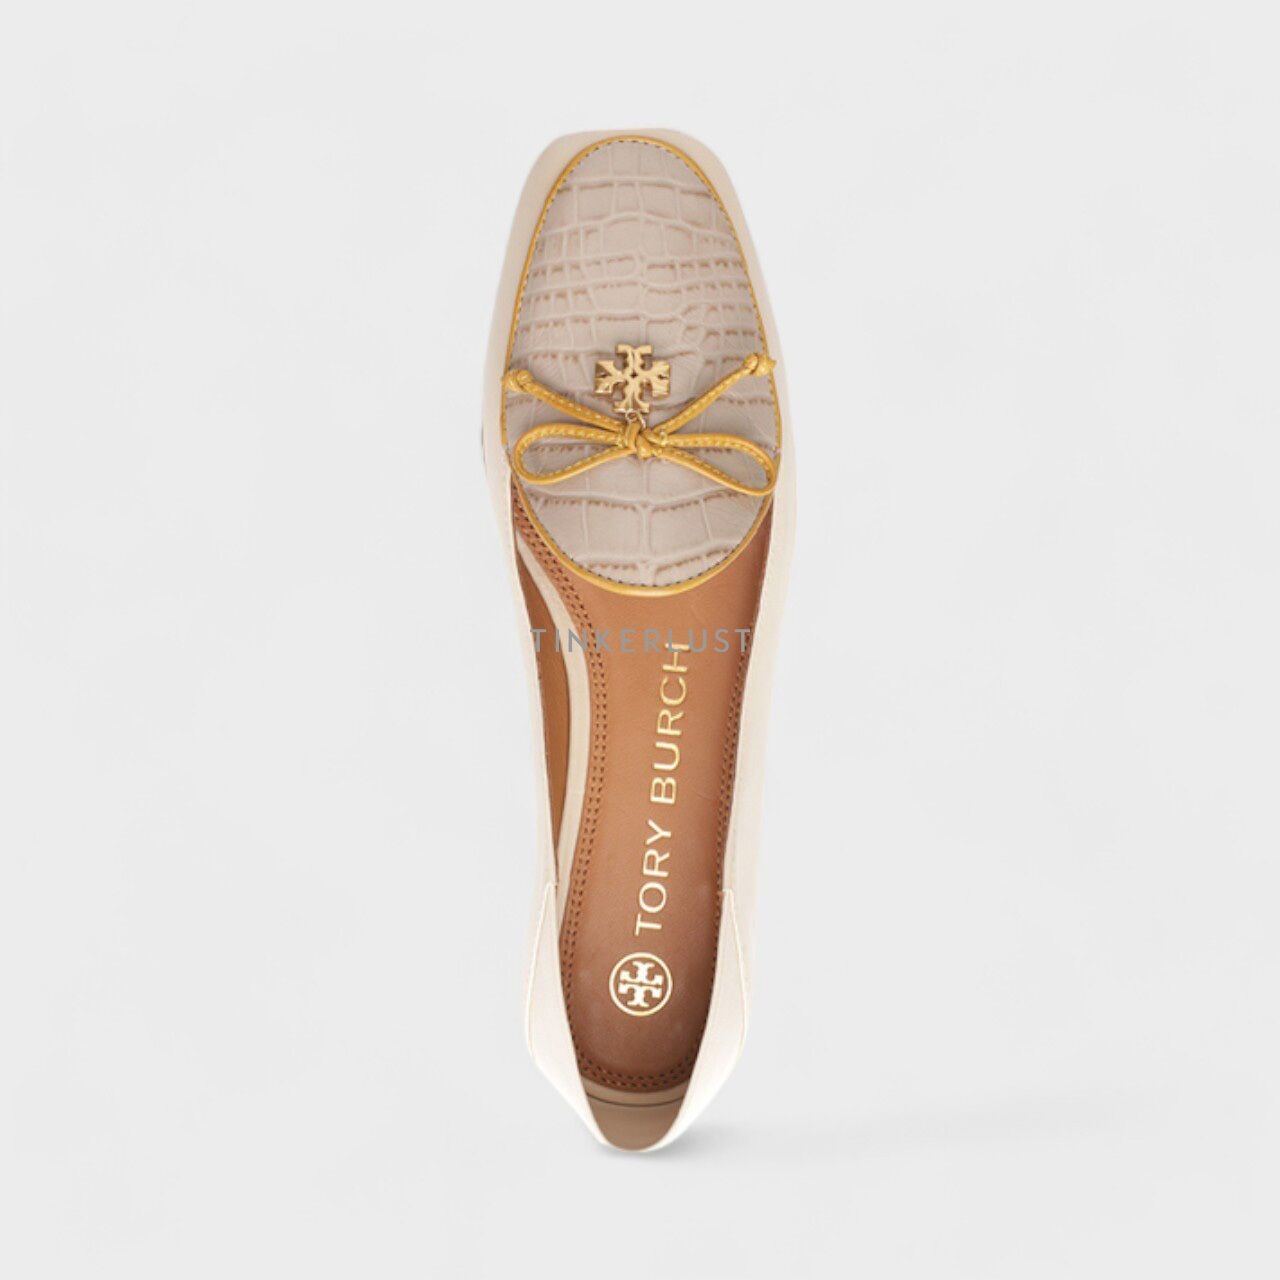 Tory Burch Charm Loafers in New Cream/Taupe Calf x Croco Embossed Leather Flats